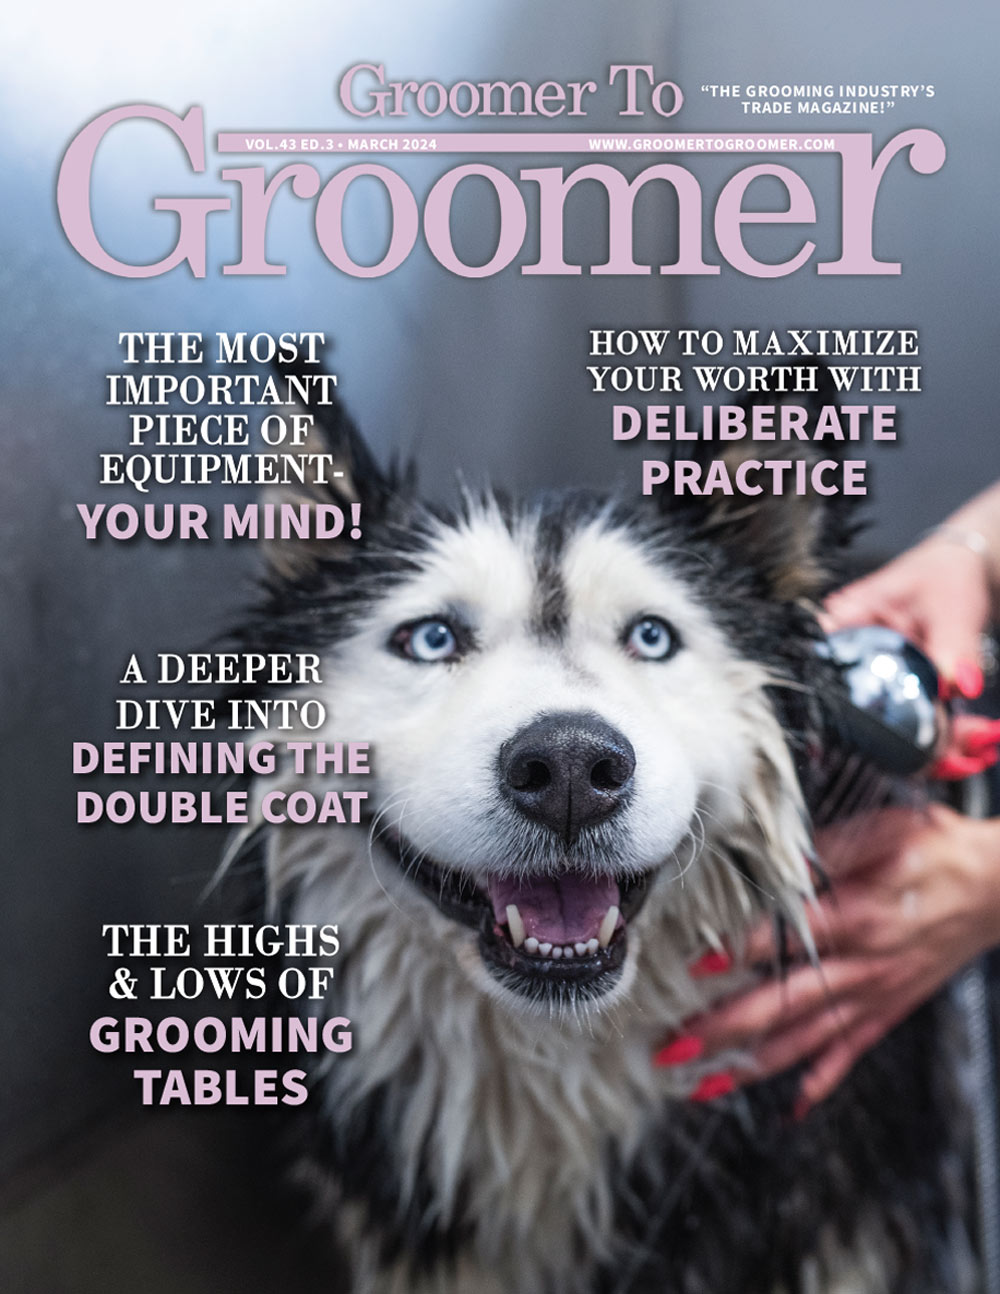 Groomer to Groomer TOC March '24 cover